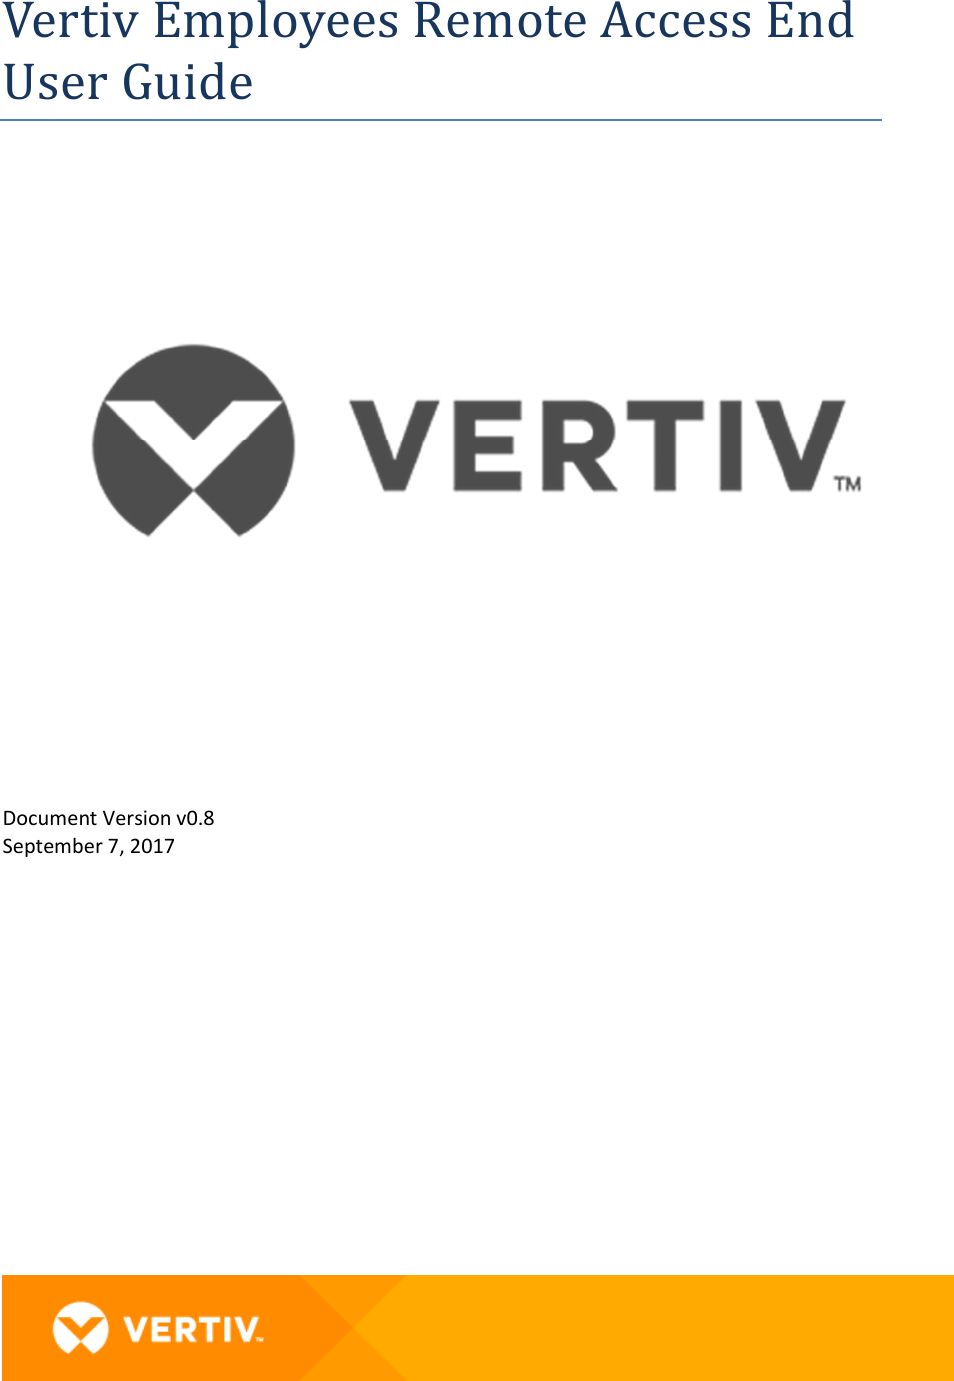 Page 1 of 8 - Vertiv Employee Remote Access And VIP End User Guide-Verizon Guide